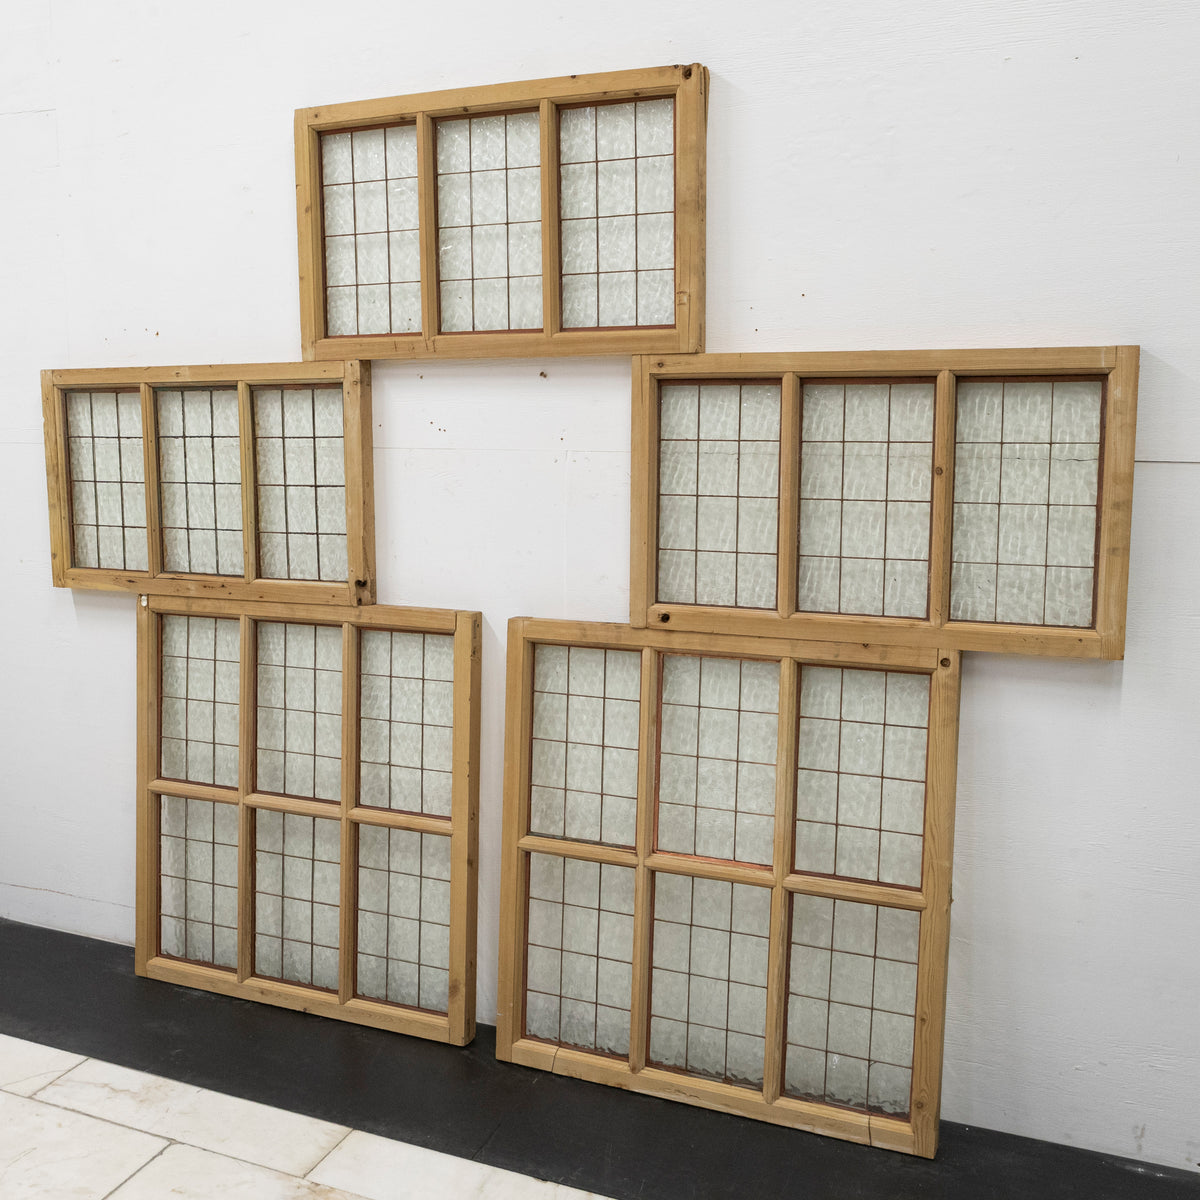 Antique Pine Framed Copperlight Window Panels | The Architectural Forum